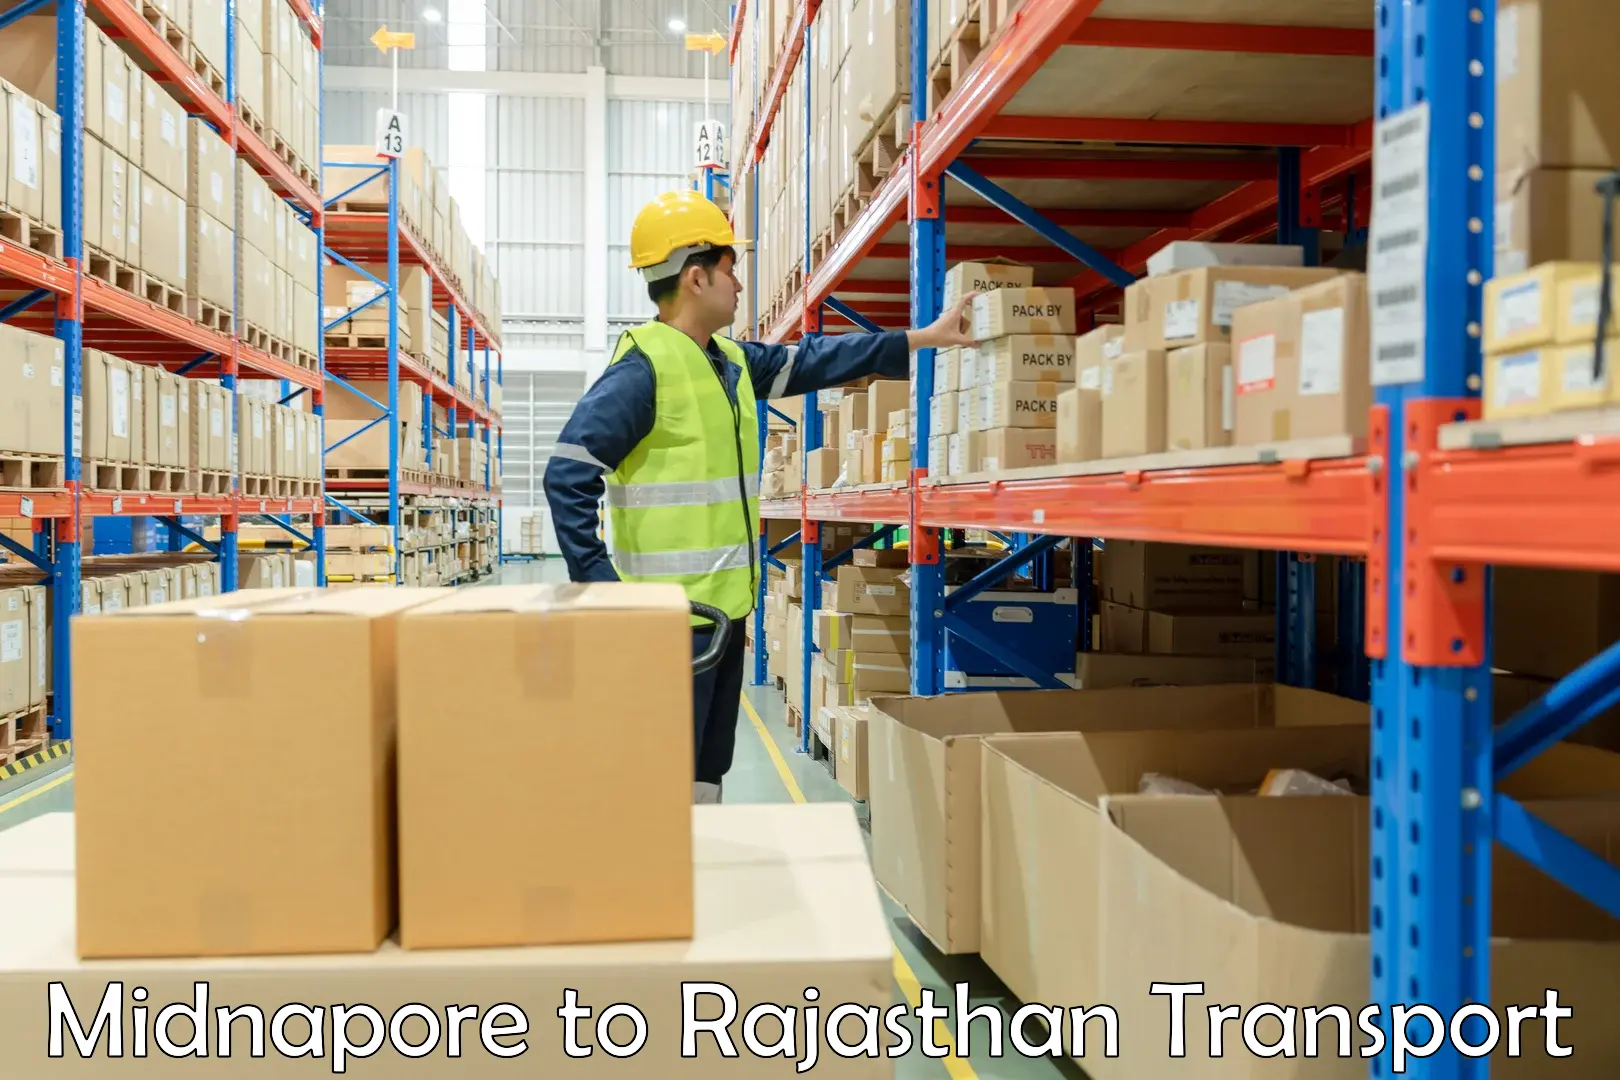 Material transport services Midnapore to Rajgarh Rajasthan